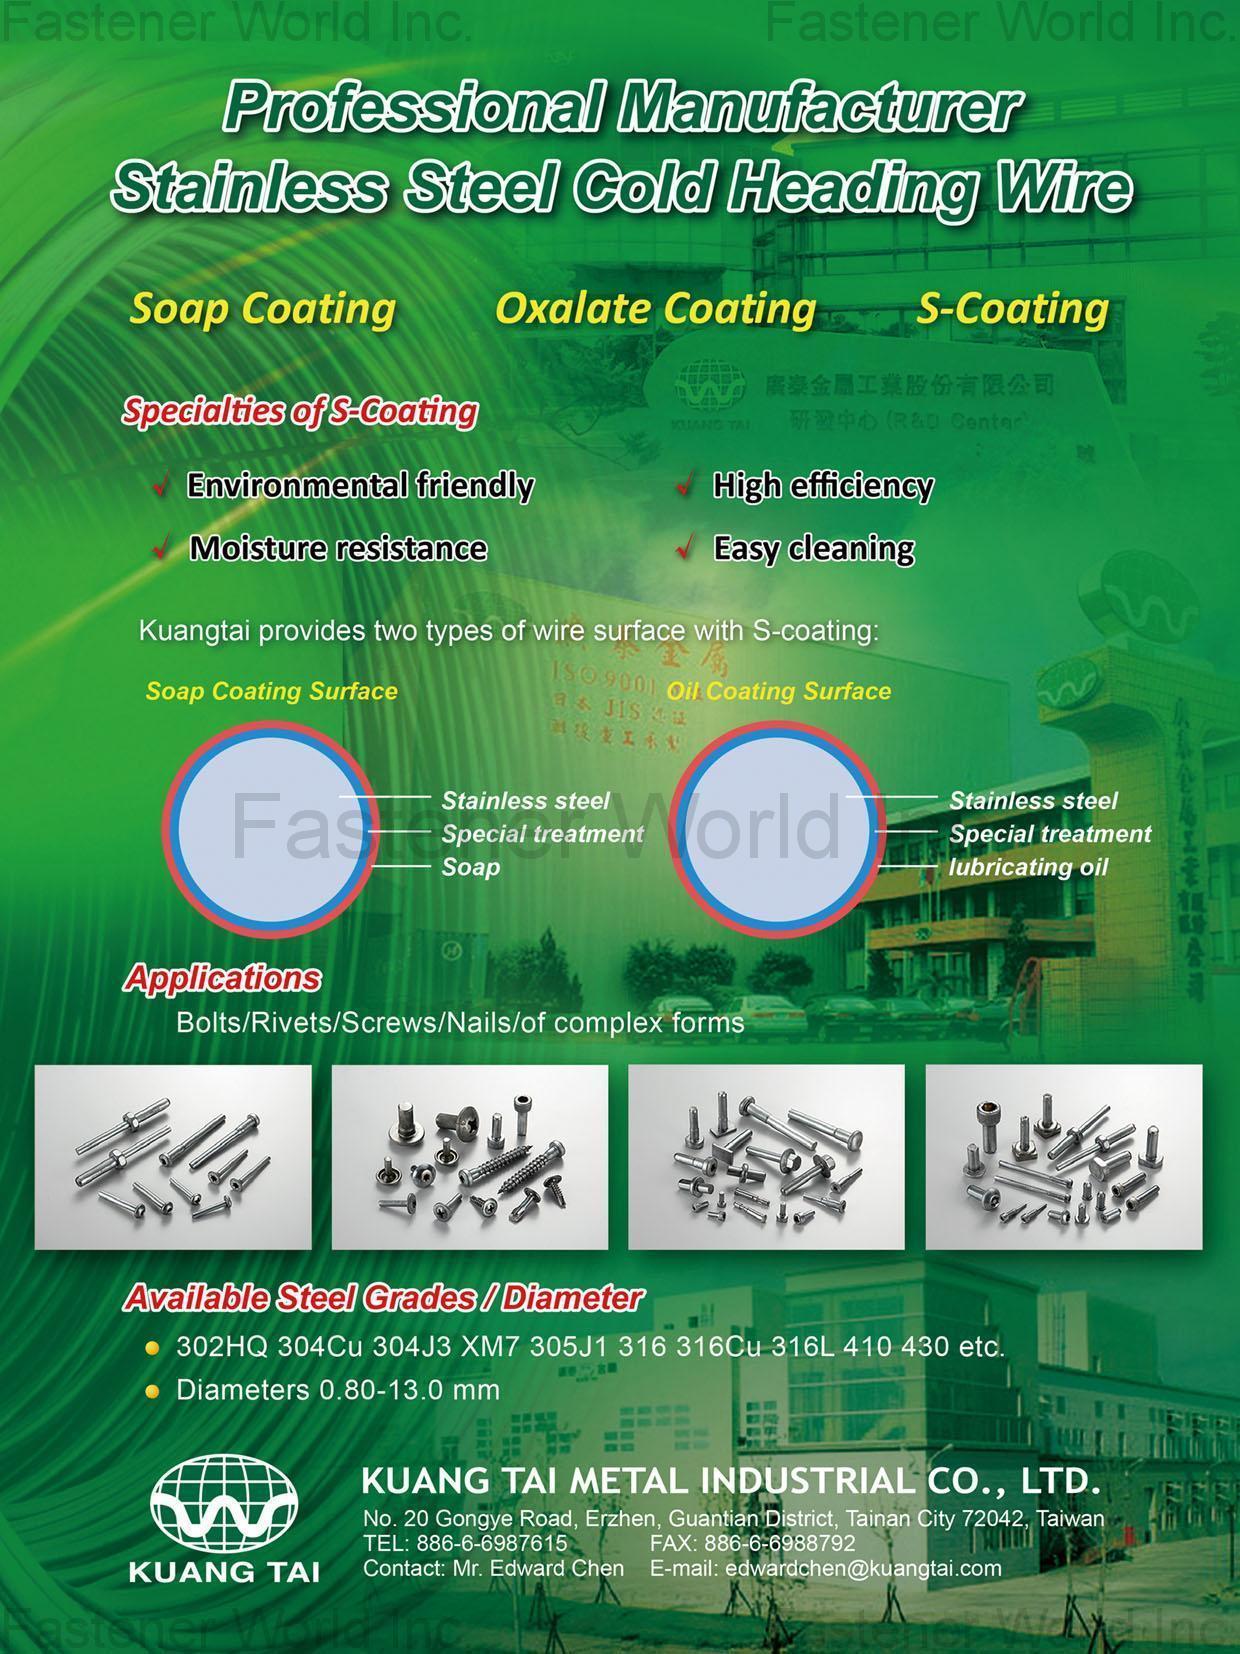 KUANG TAI METAL INDUSTRIAL CO., LTD. , Stainless Steel Cold Heading Wire